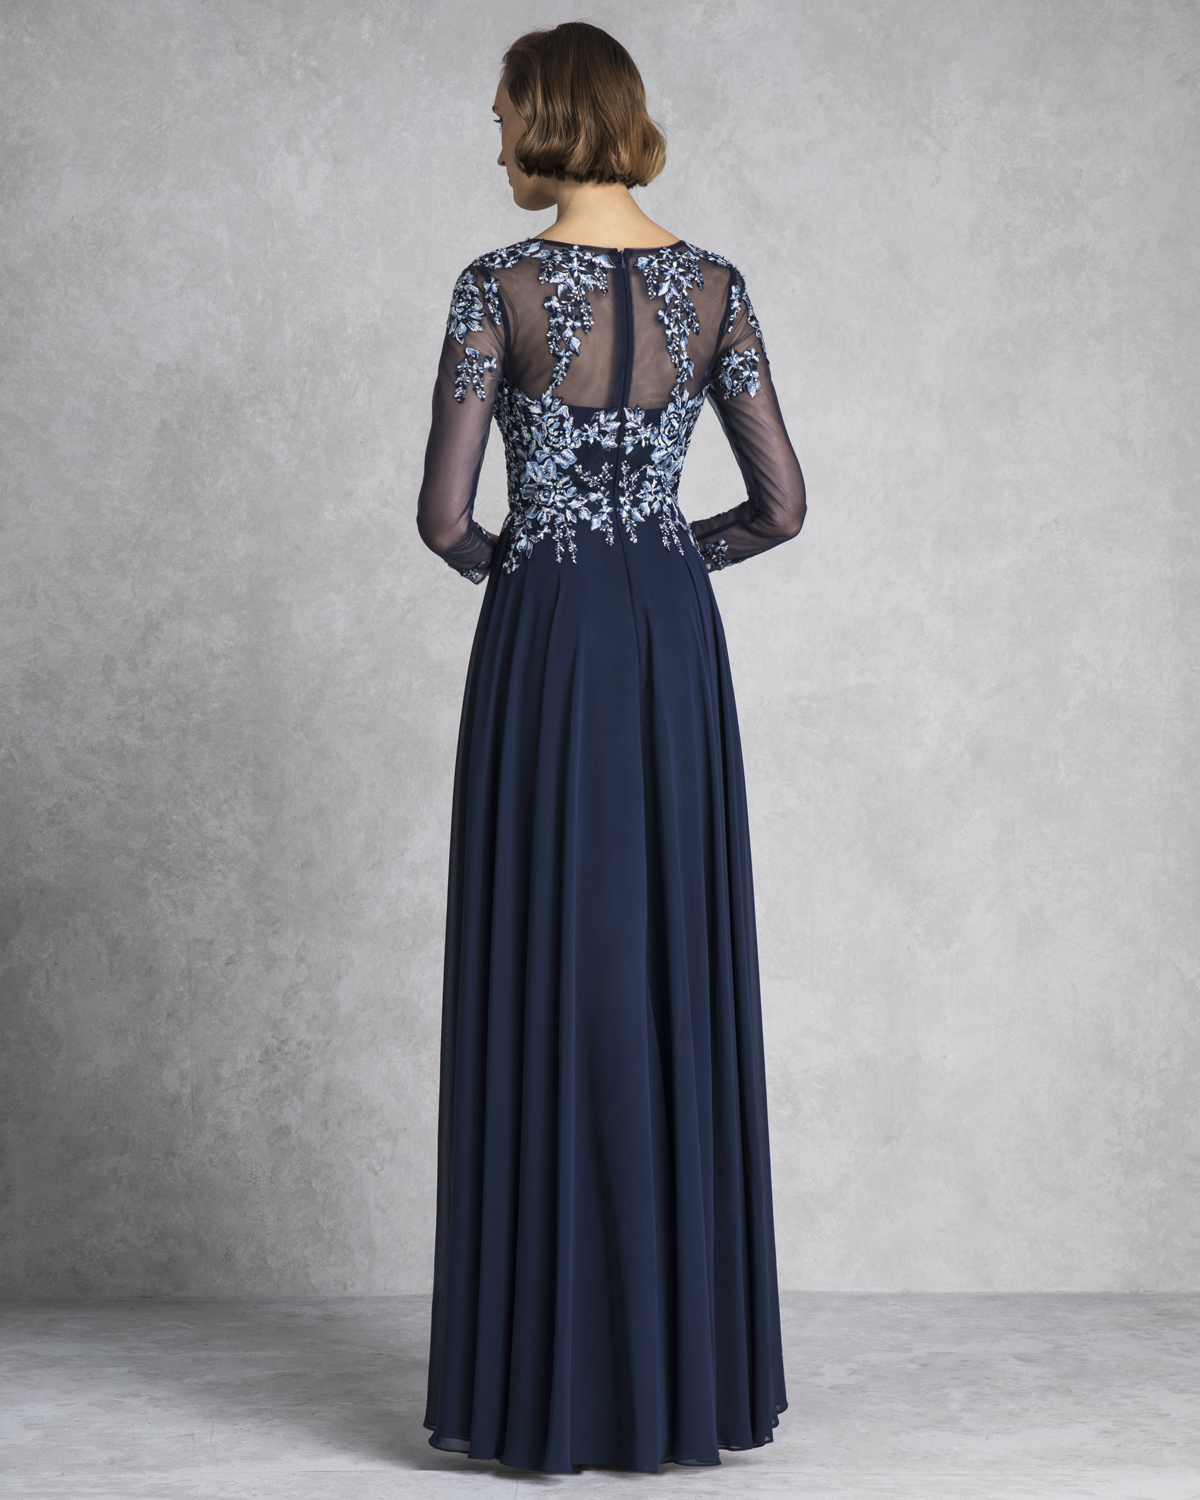 Classic Dresses / Long evening dress with long tulle sleeves and beading